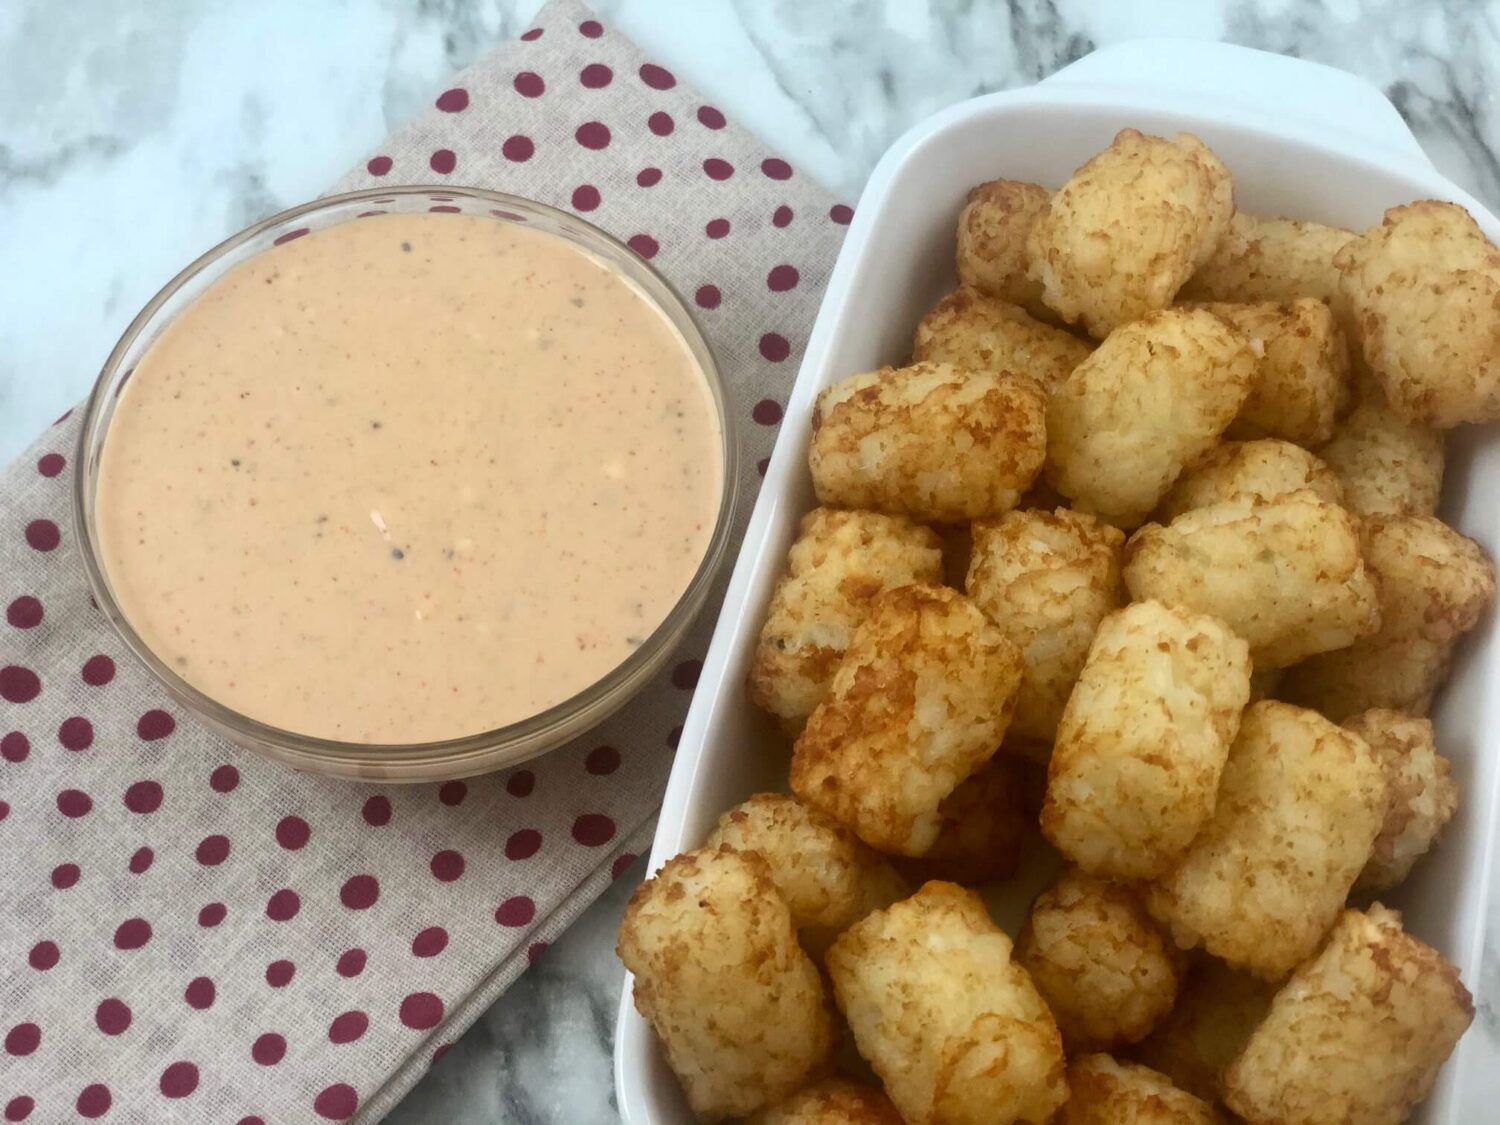 The Best Tater Tot Sauce for Dipping